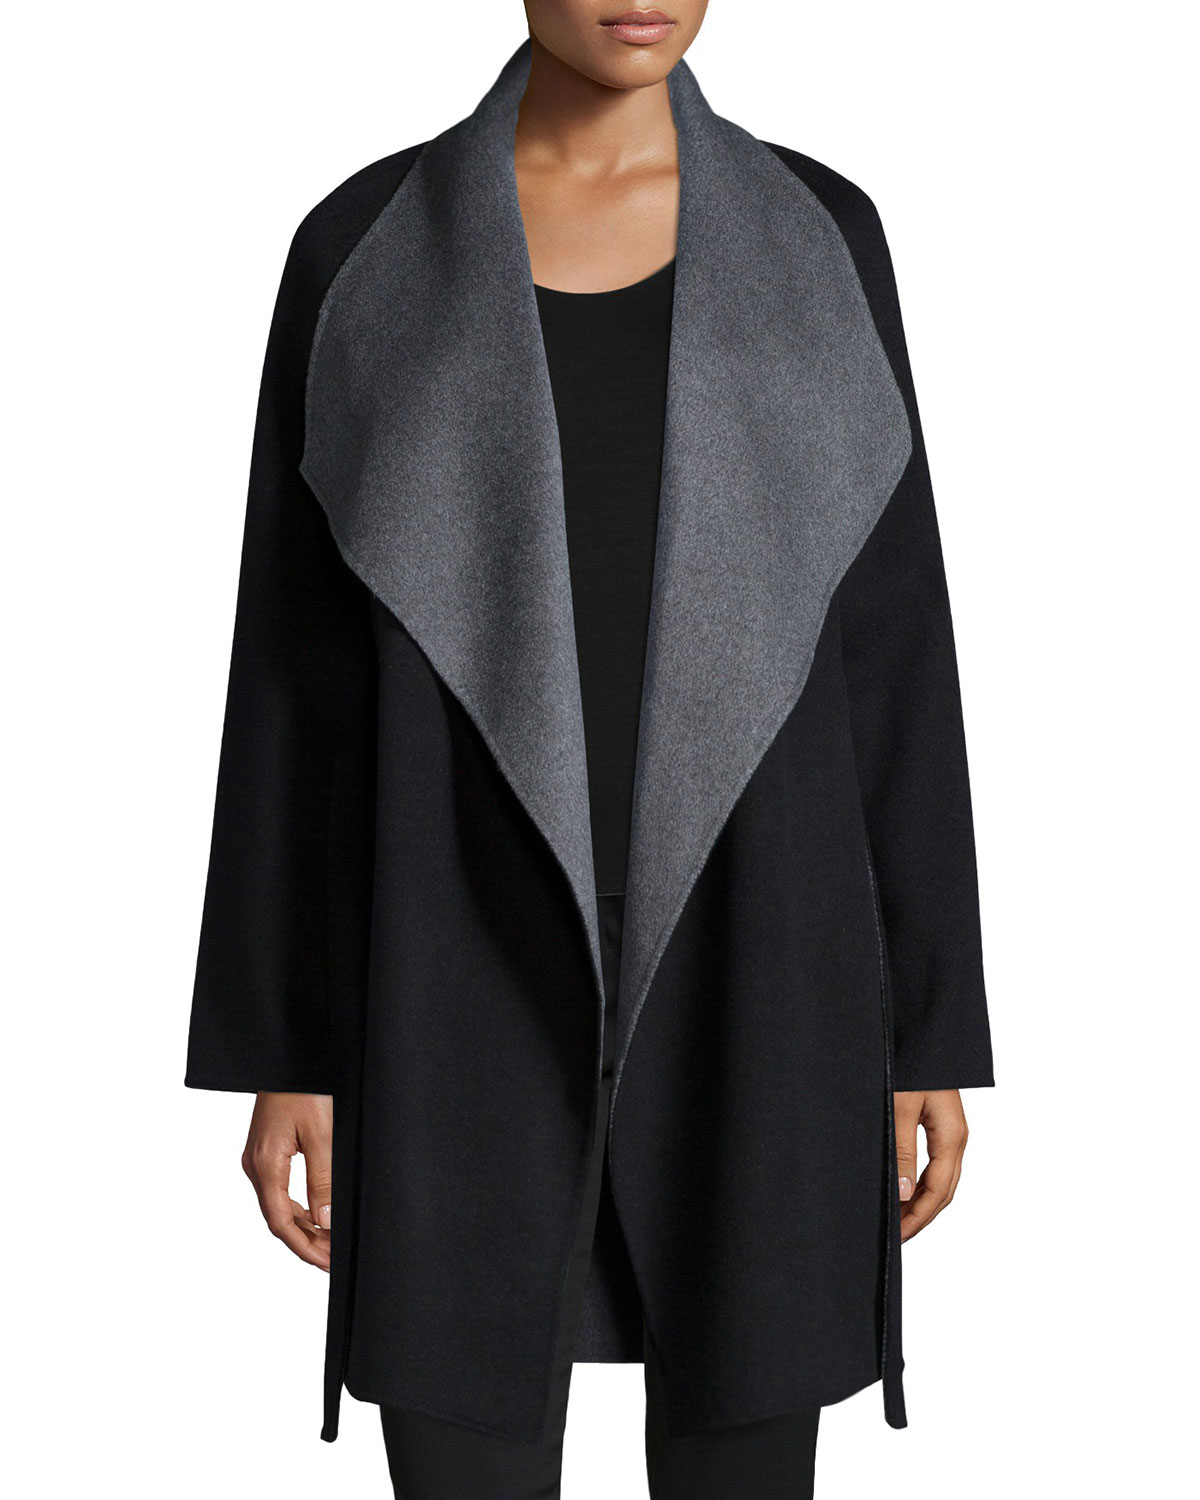 Lyst - Neiman Marcus Cashmere Double-face Two-tone Wrap Coat in Black